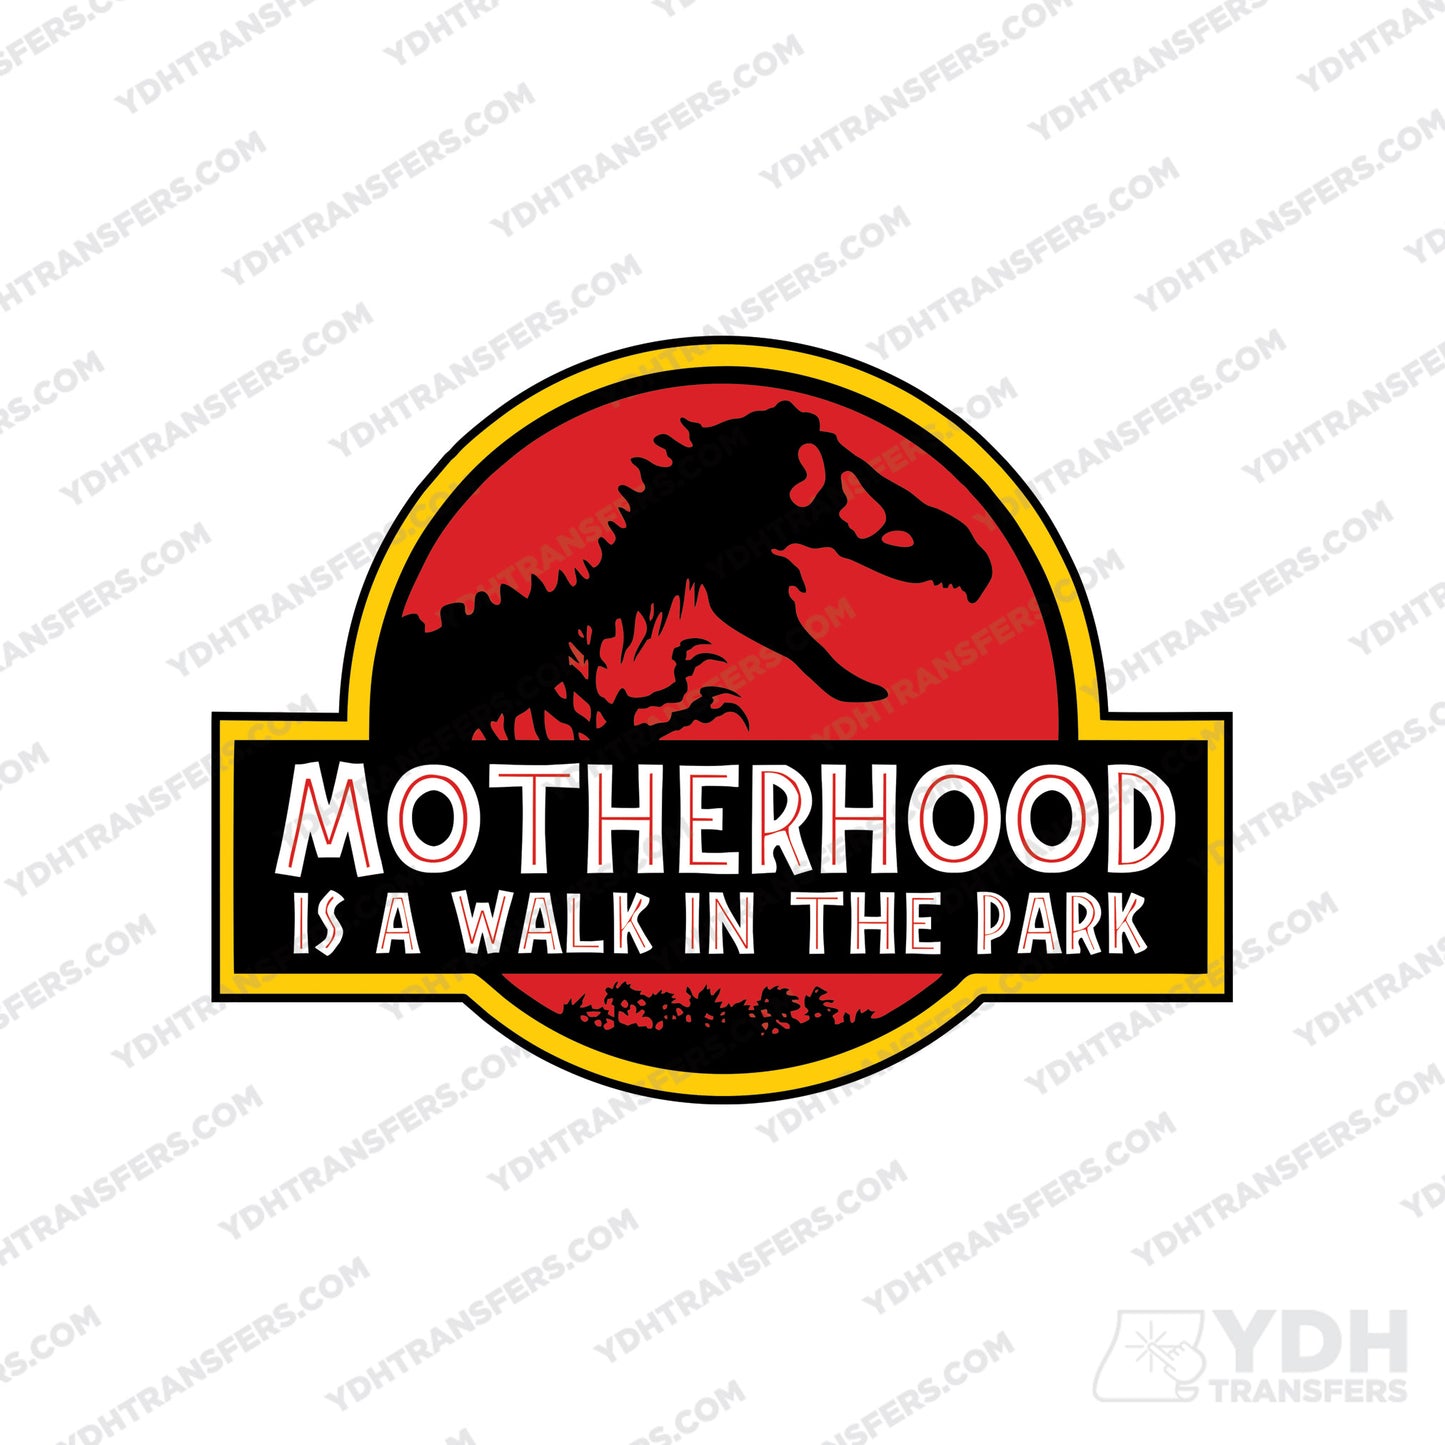 Motherhood is a walk in the Park Full Color Transfer